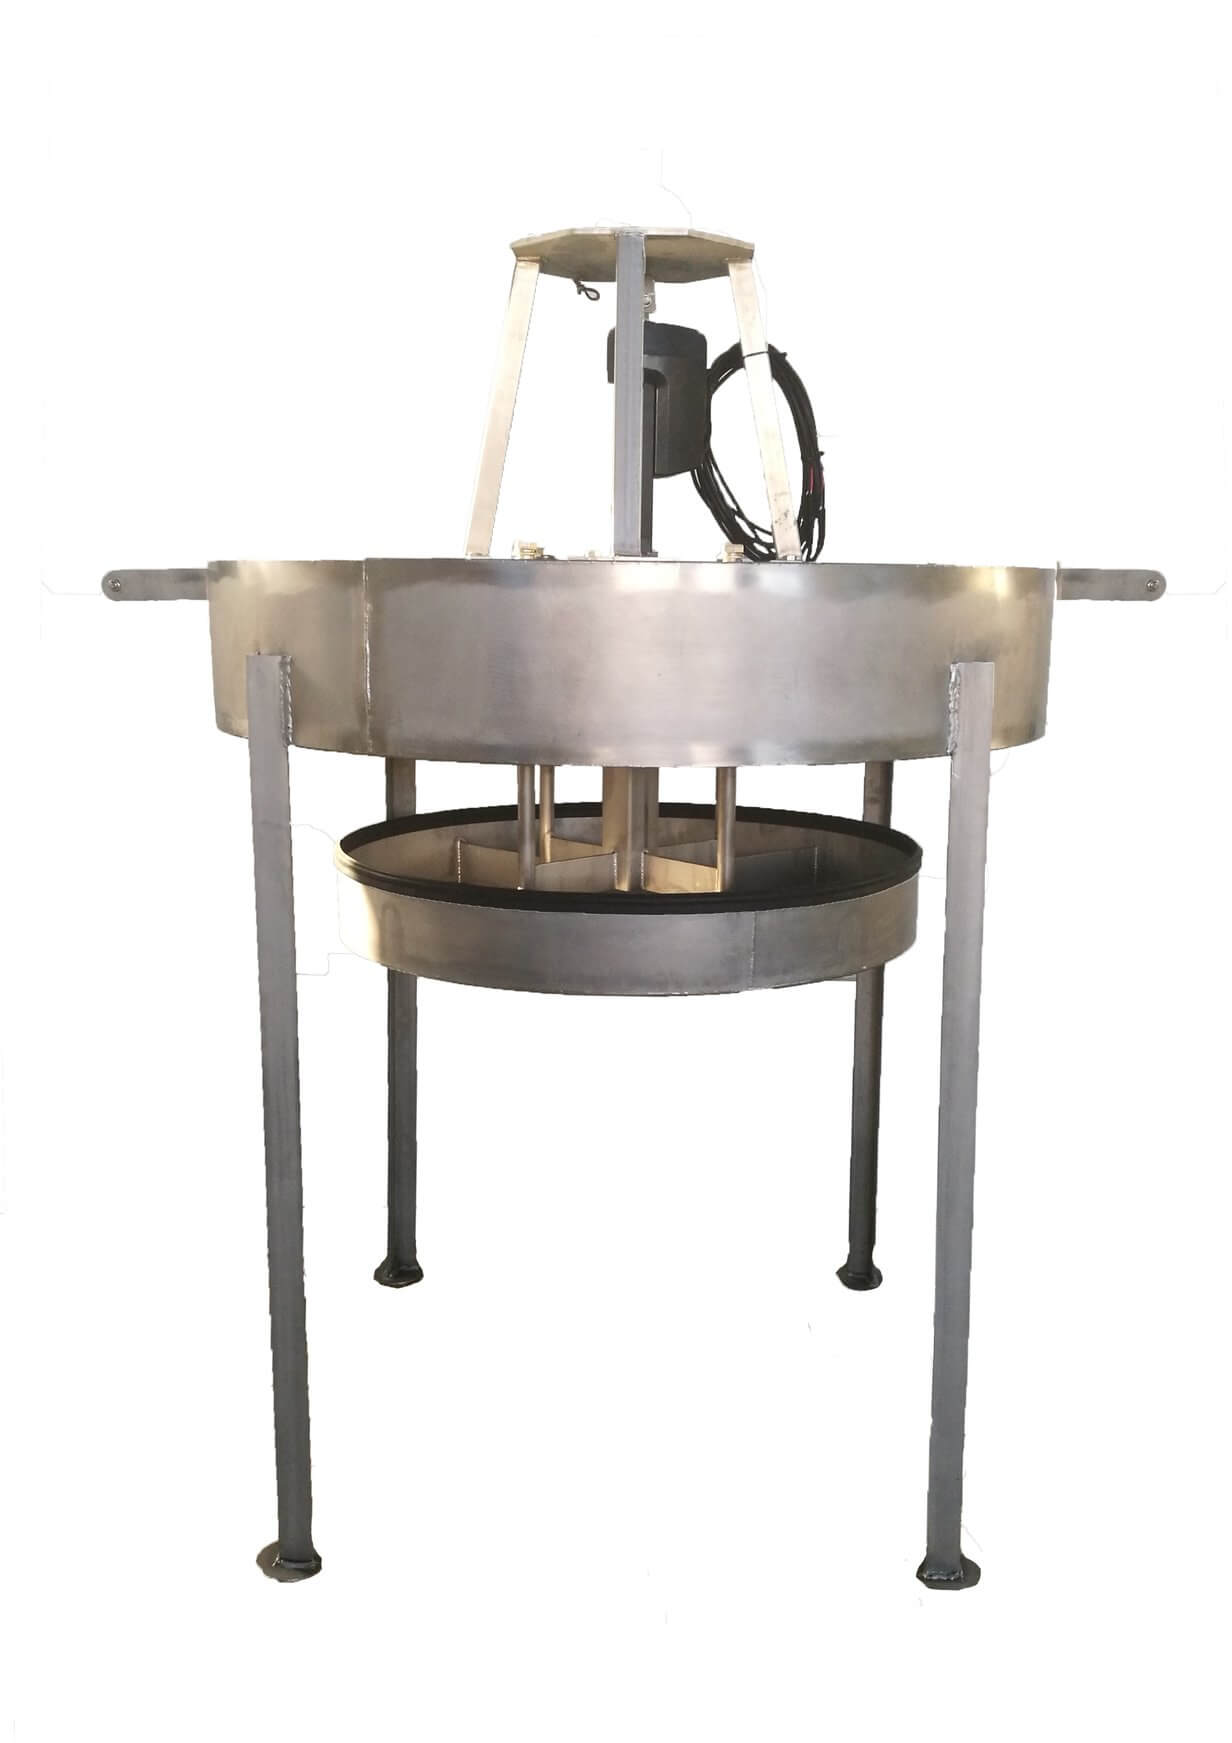 ATB-CWE-EMC Decanter with closable discharge weir